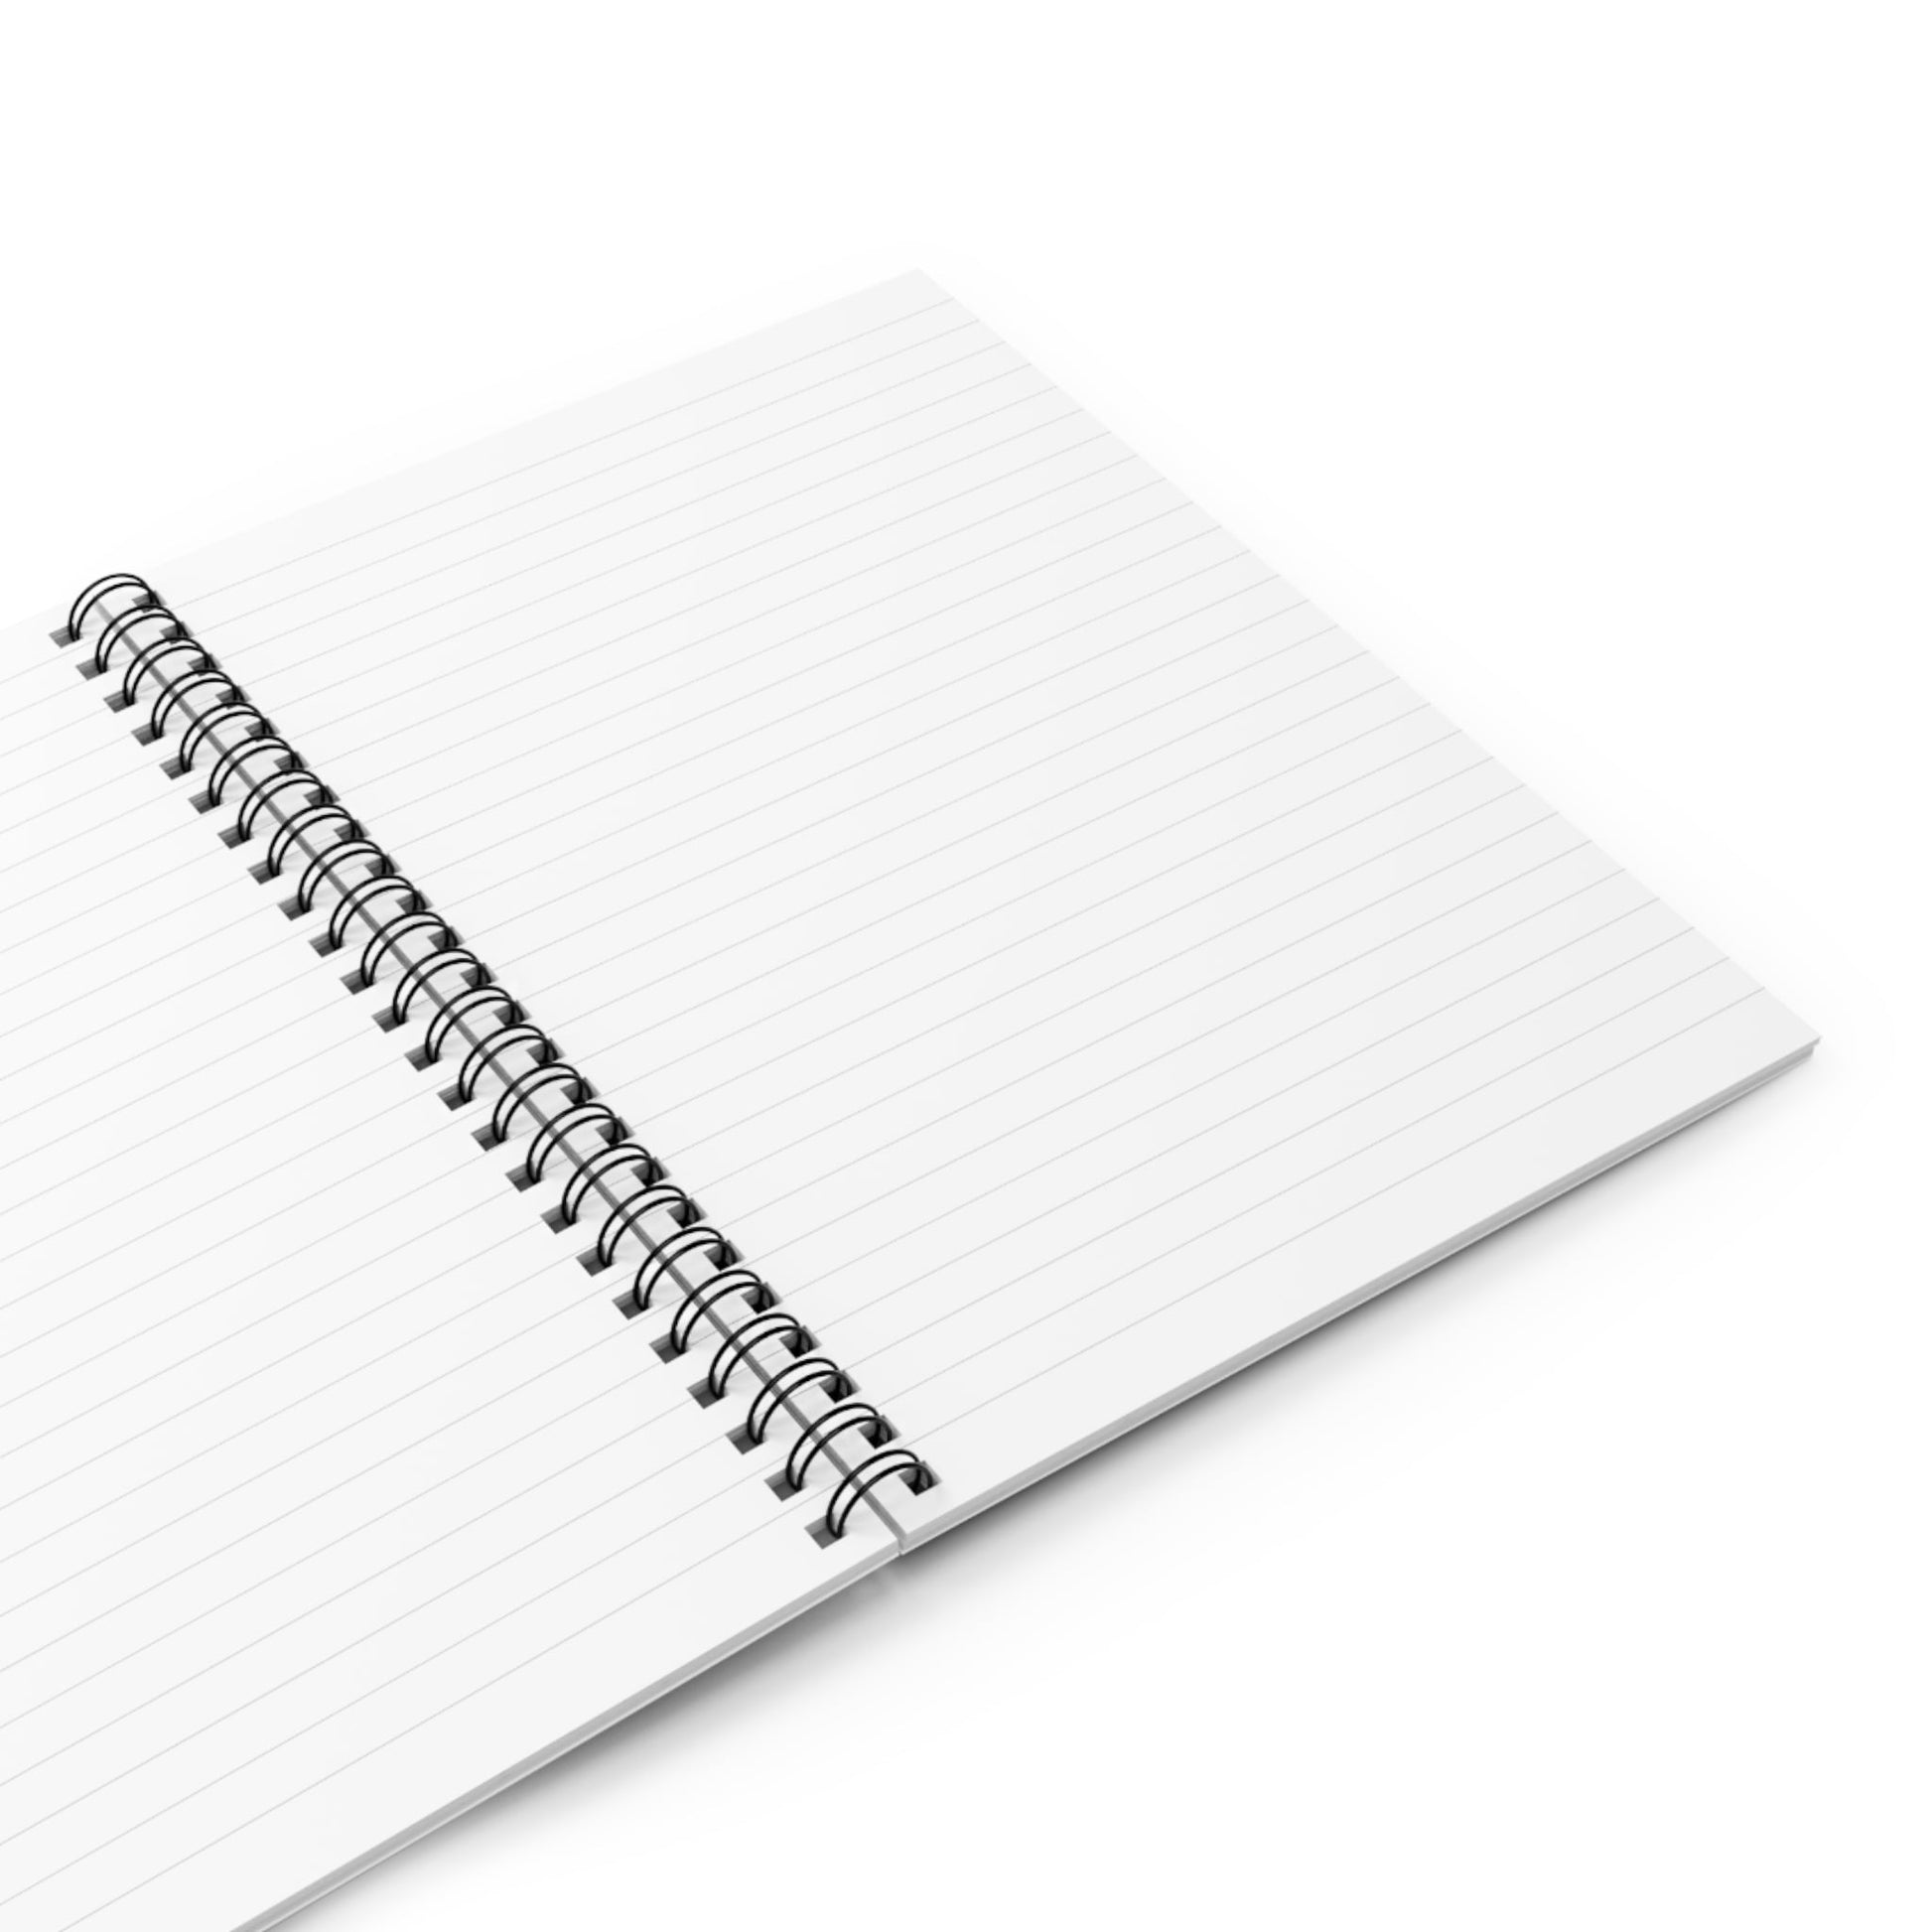 Spiral Notebook with Japanese Aesthetic Cover Opened with Blank White College Ruled Pages